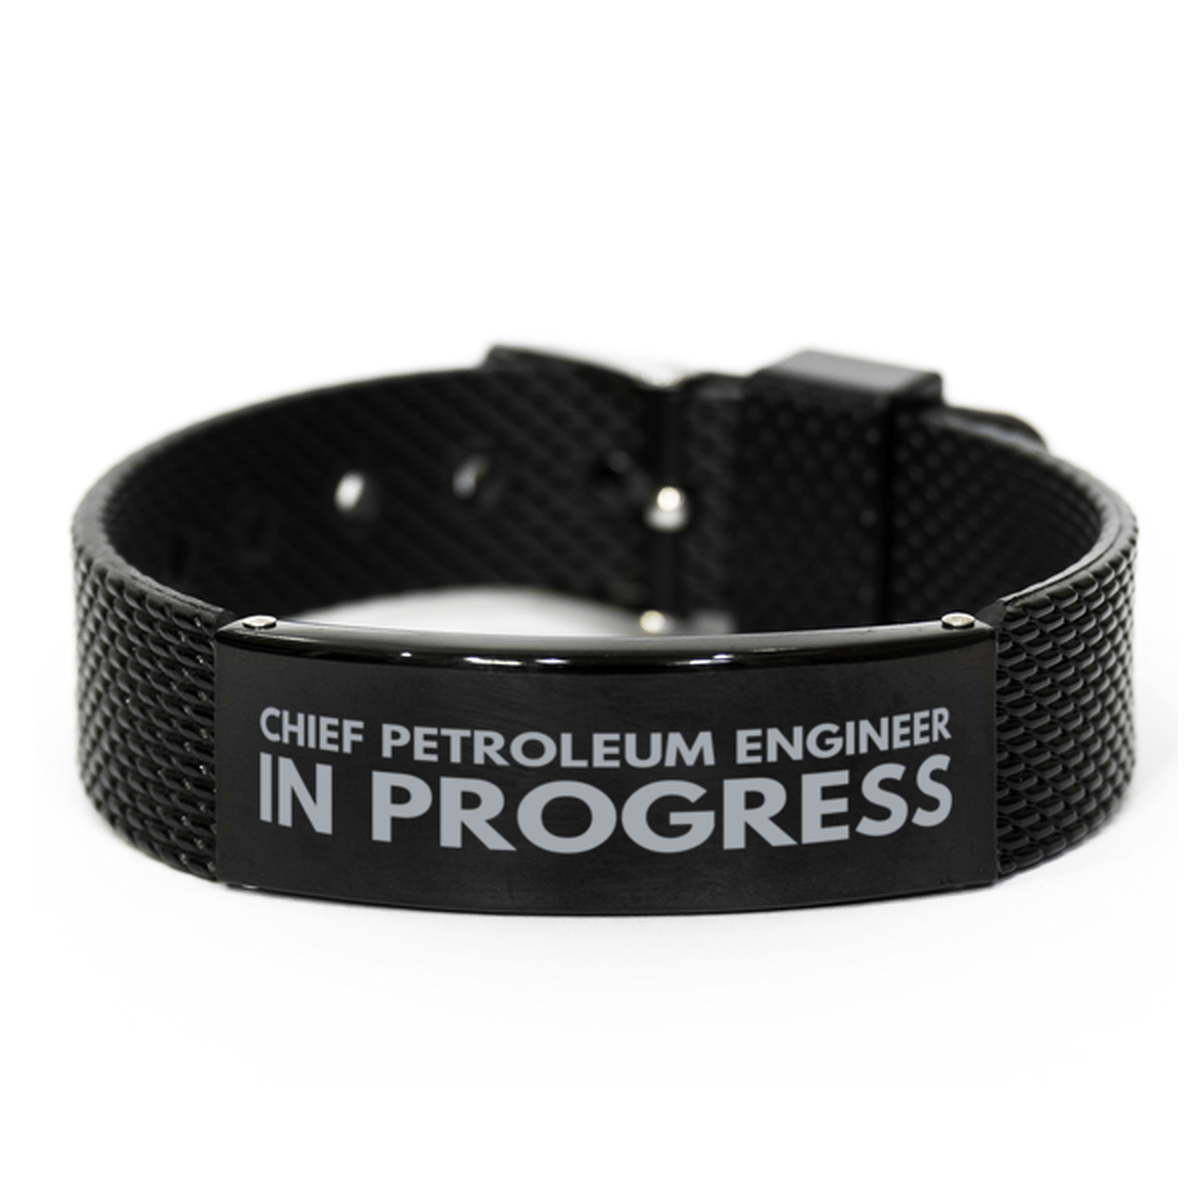 Inspirational Chief Petroleum Engineer Black Shark Mesh Bracelet, Chief Petroleum Engineer In Progress, Best Graduation Gifts for Students